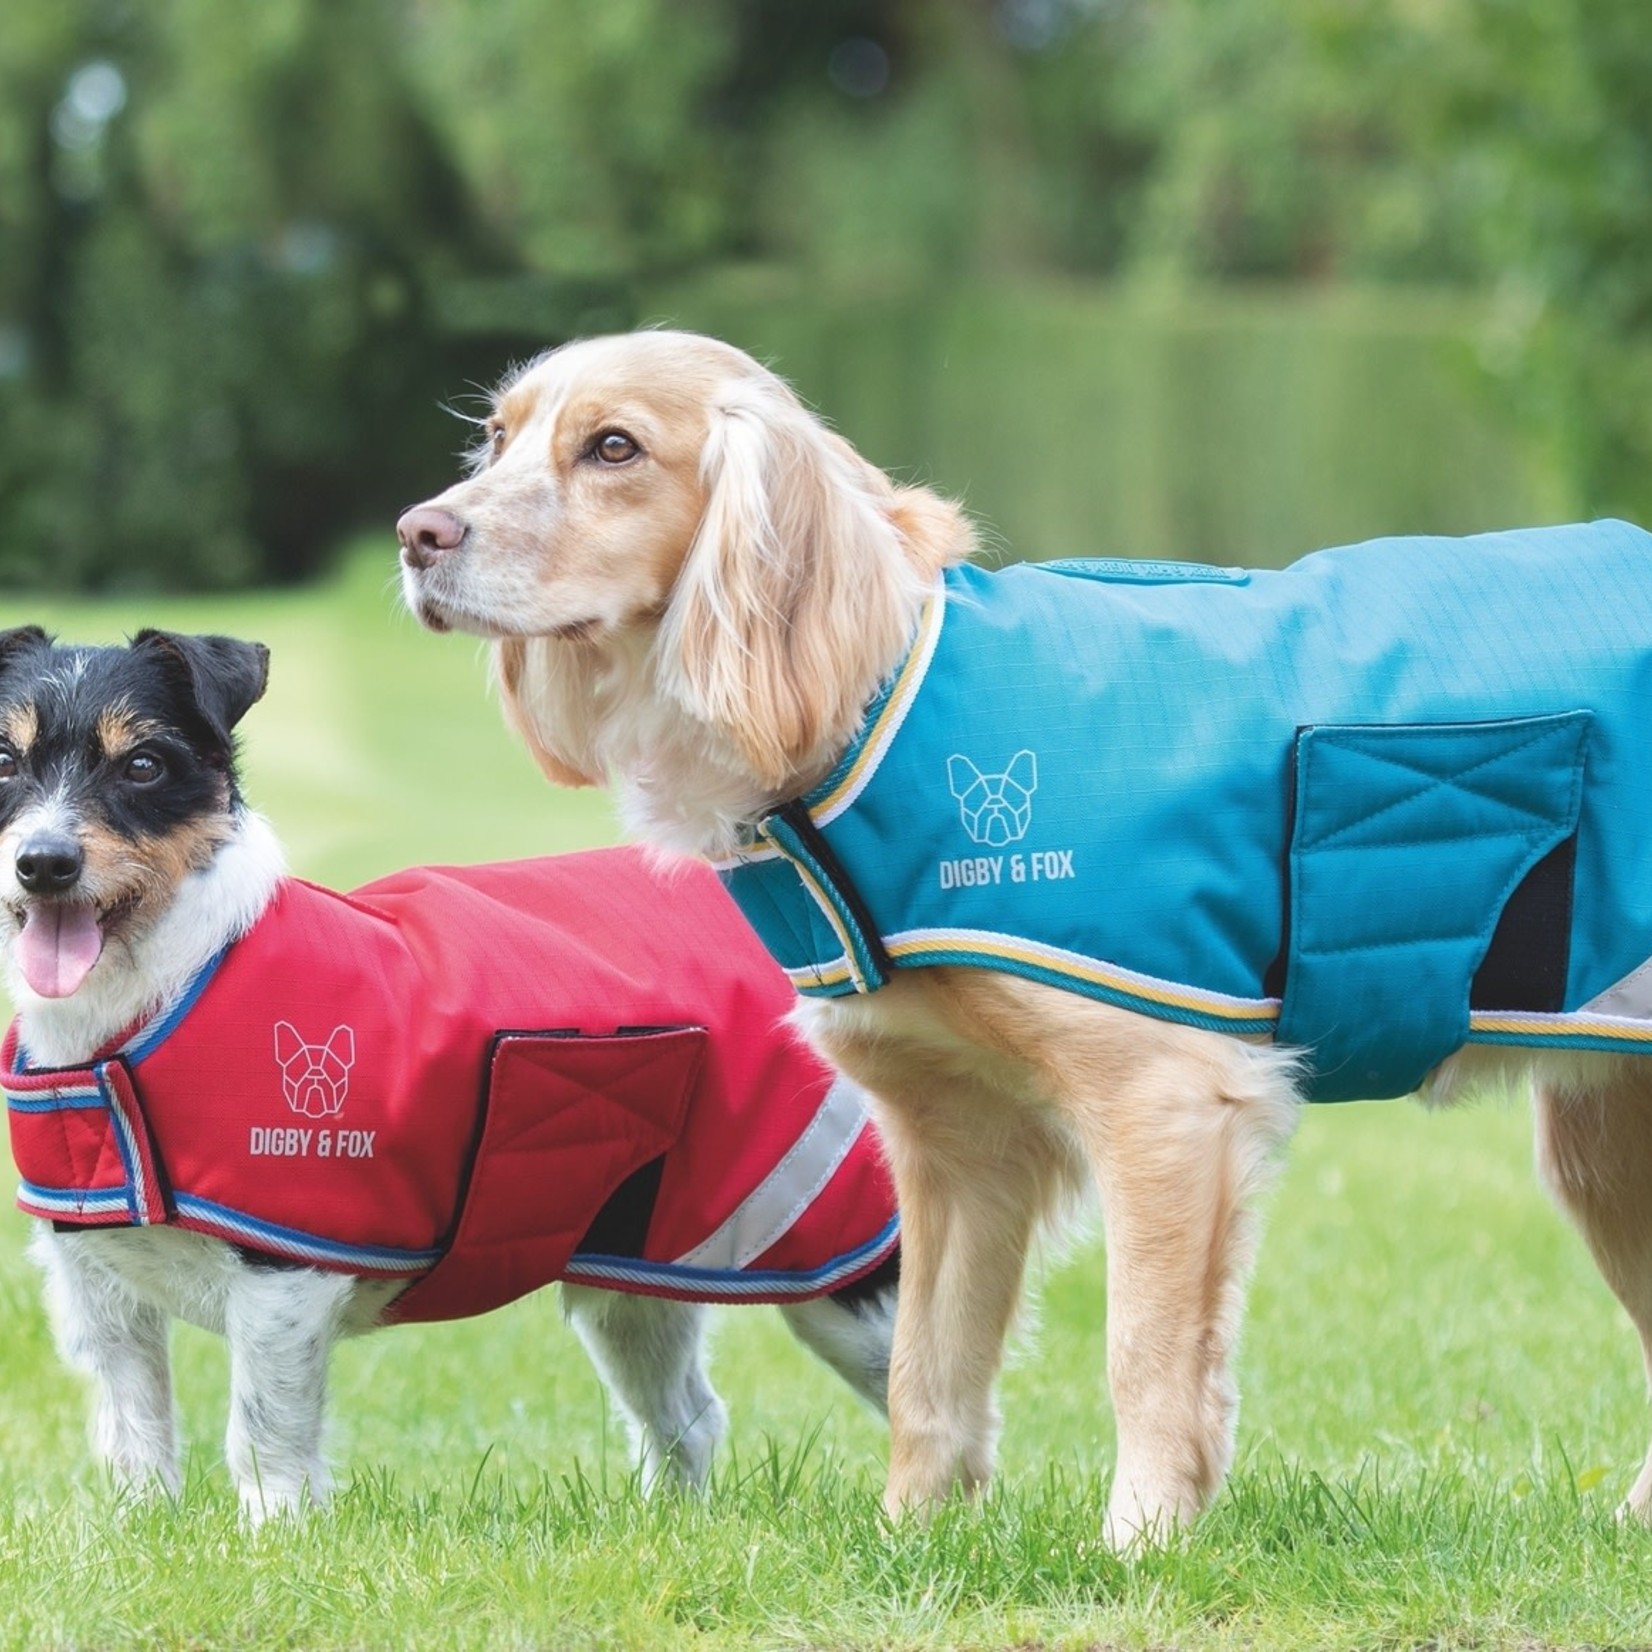 Digby and fox Digby Waterproof Dog Coat